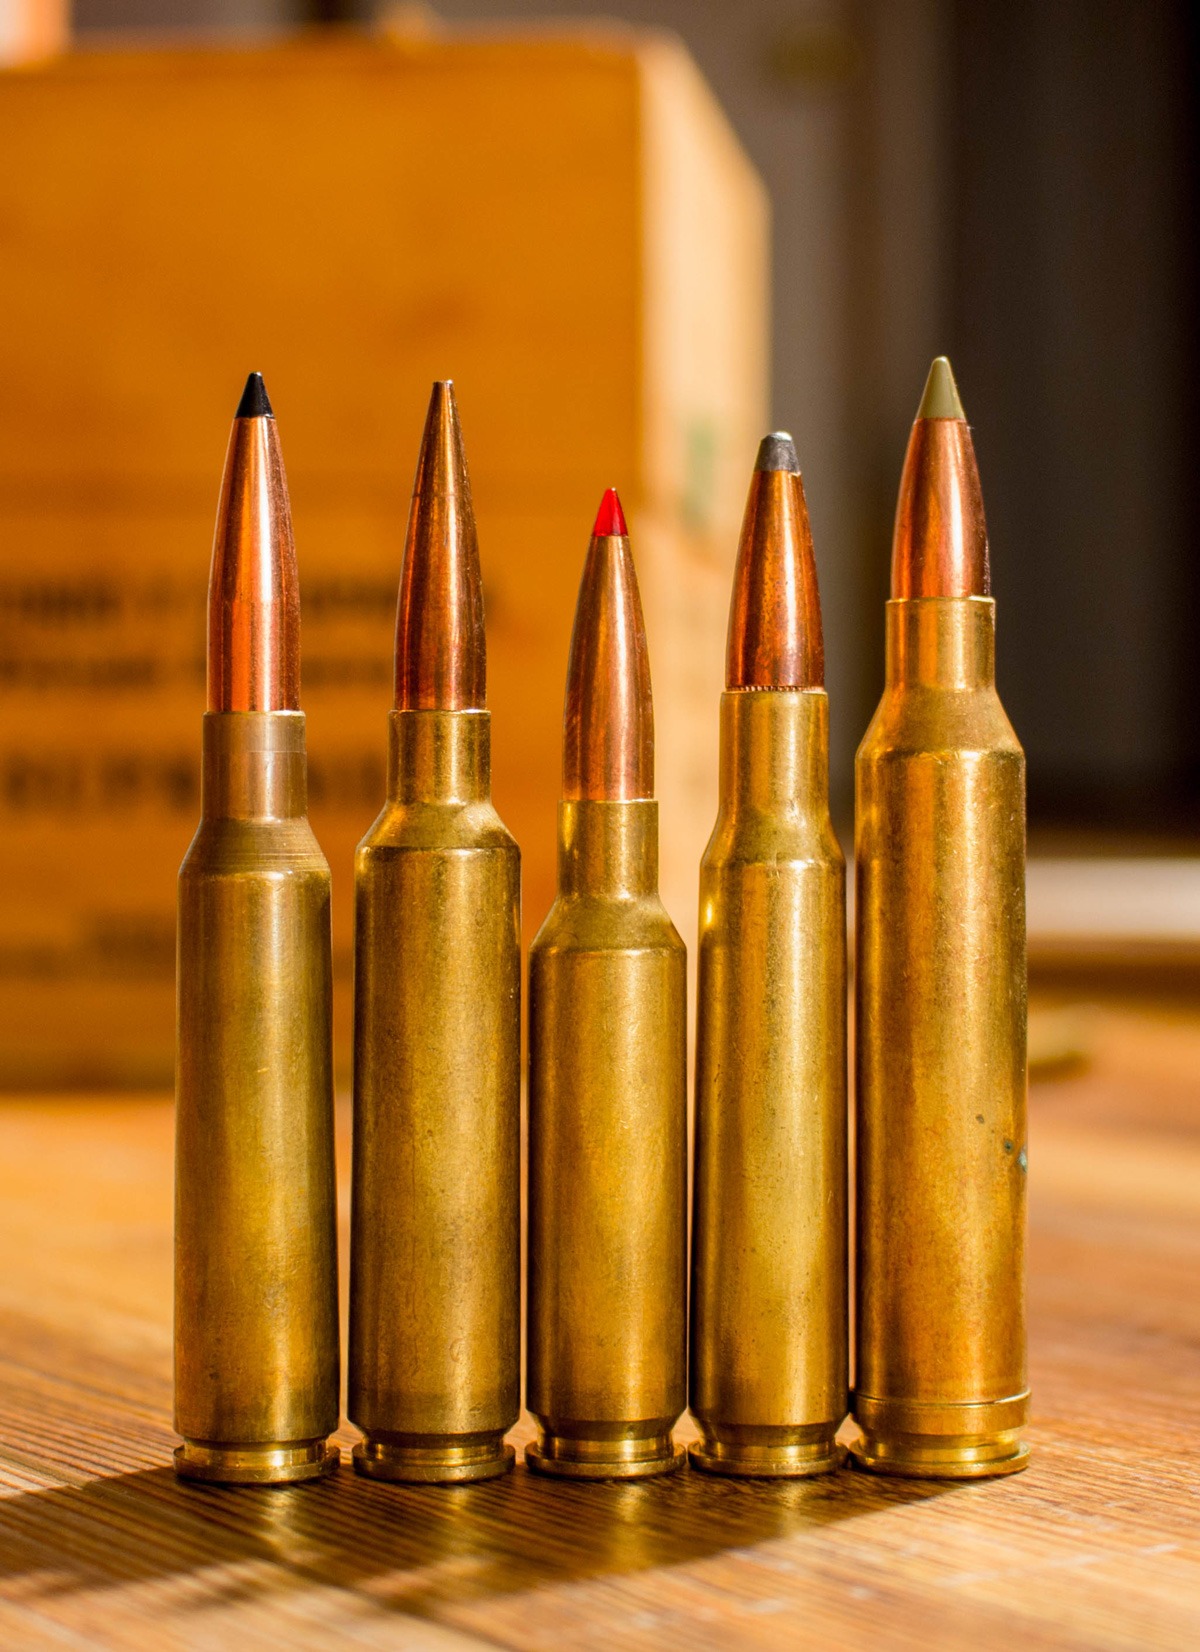 Even with the recent accent of 6.5 cartridges, the original 6.5x55 seems to...